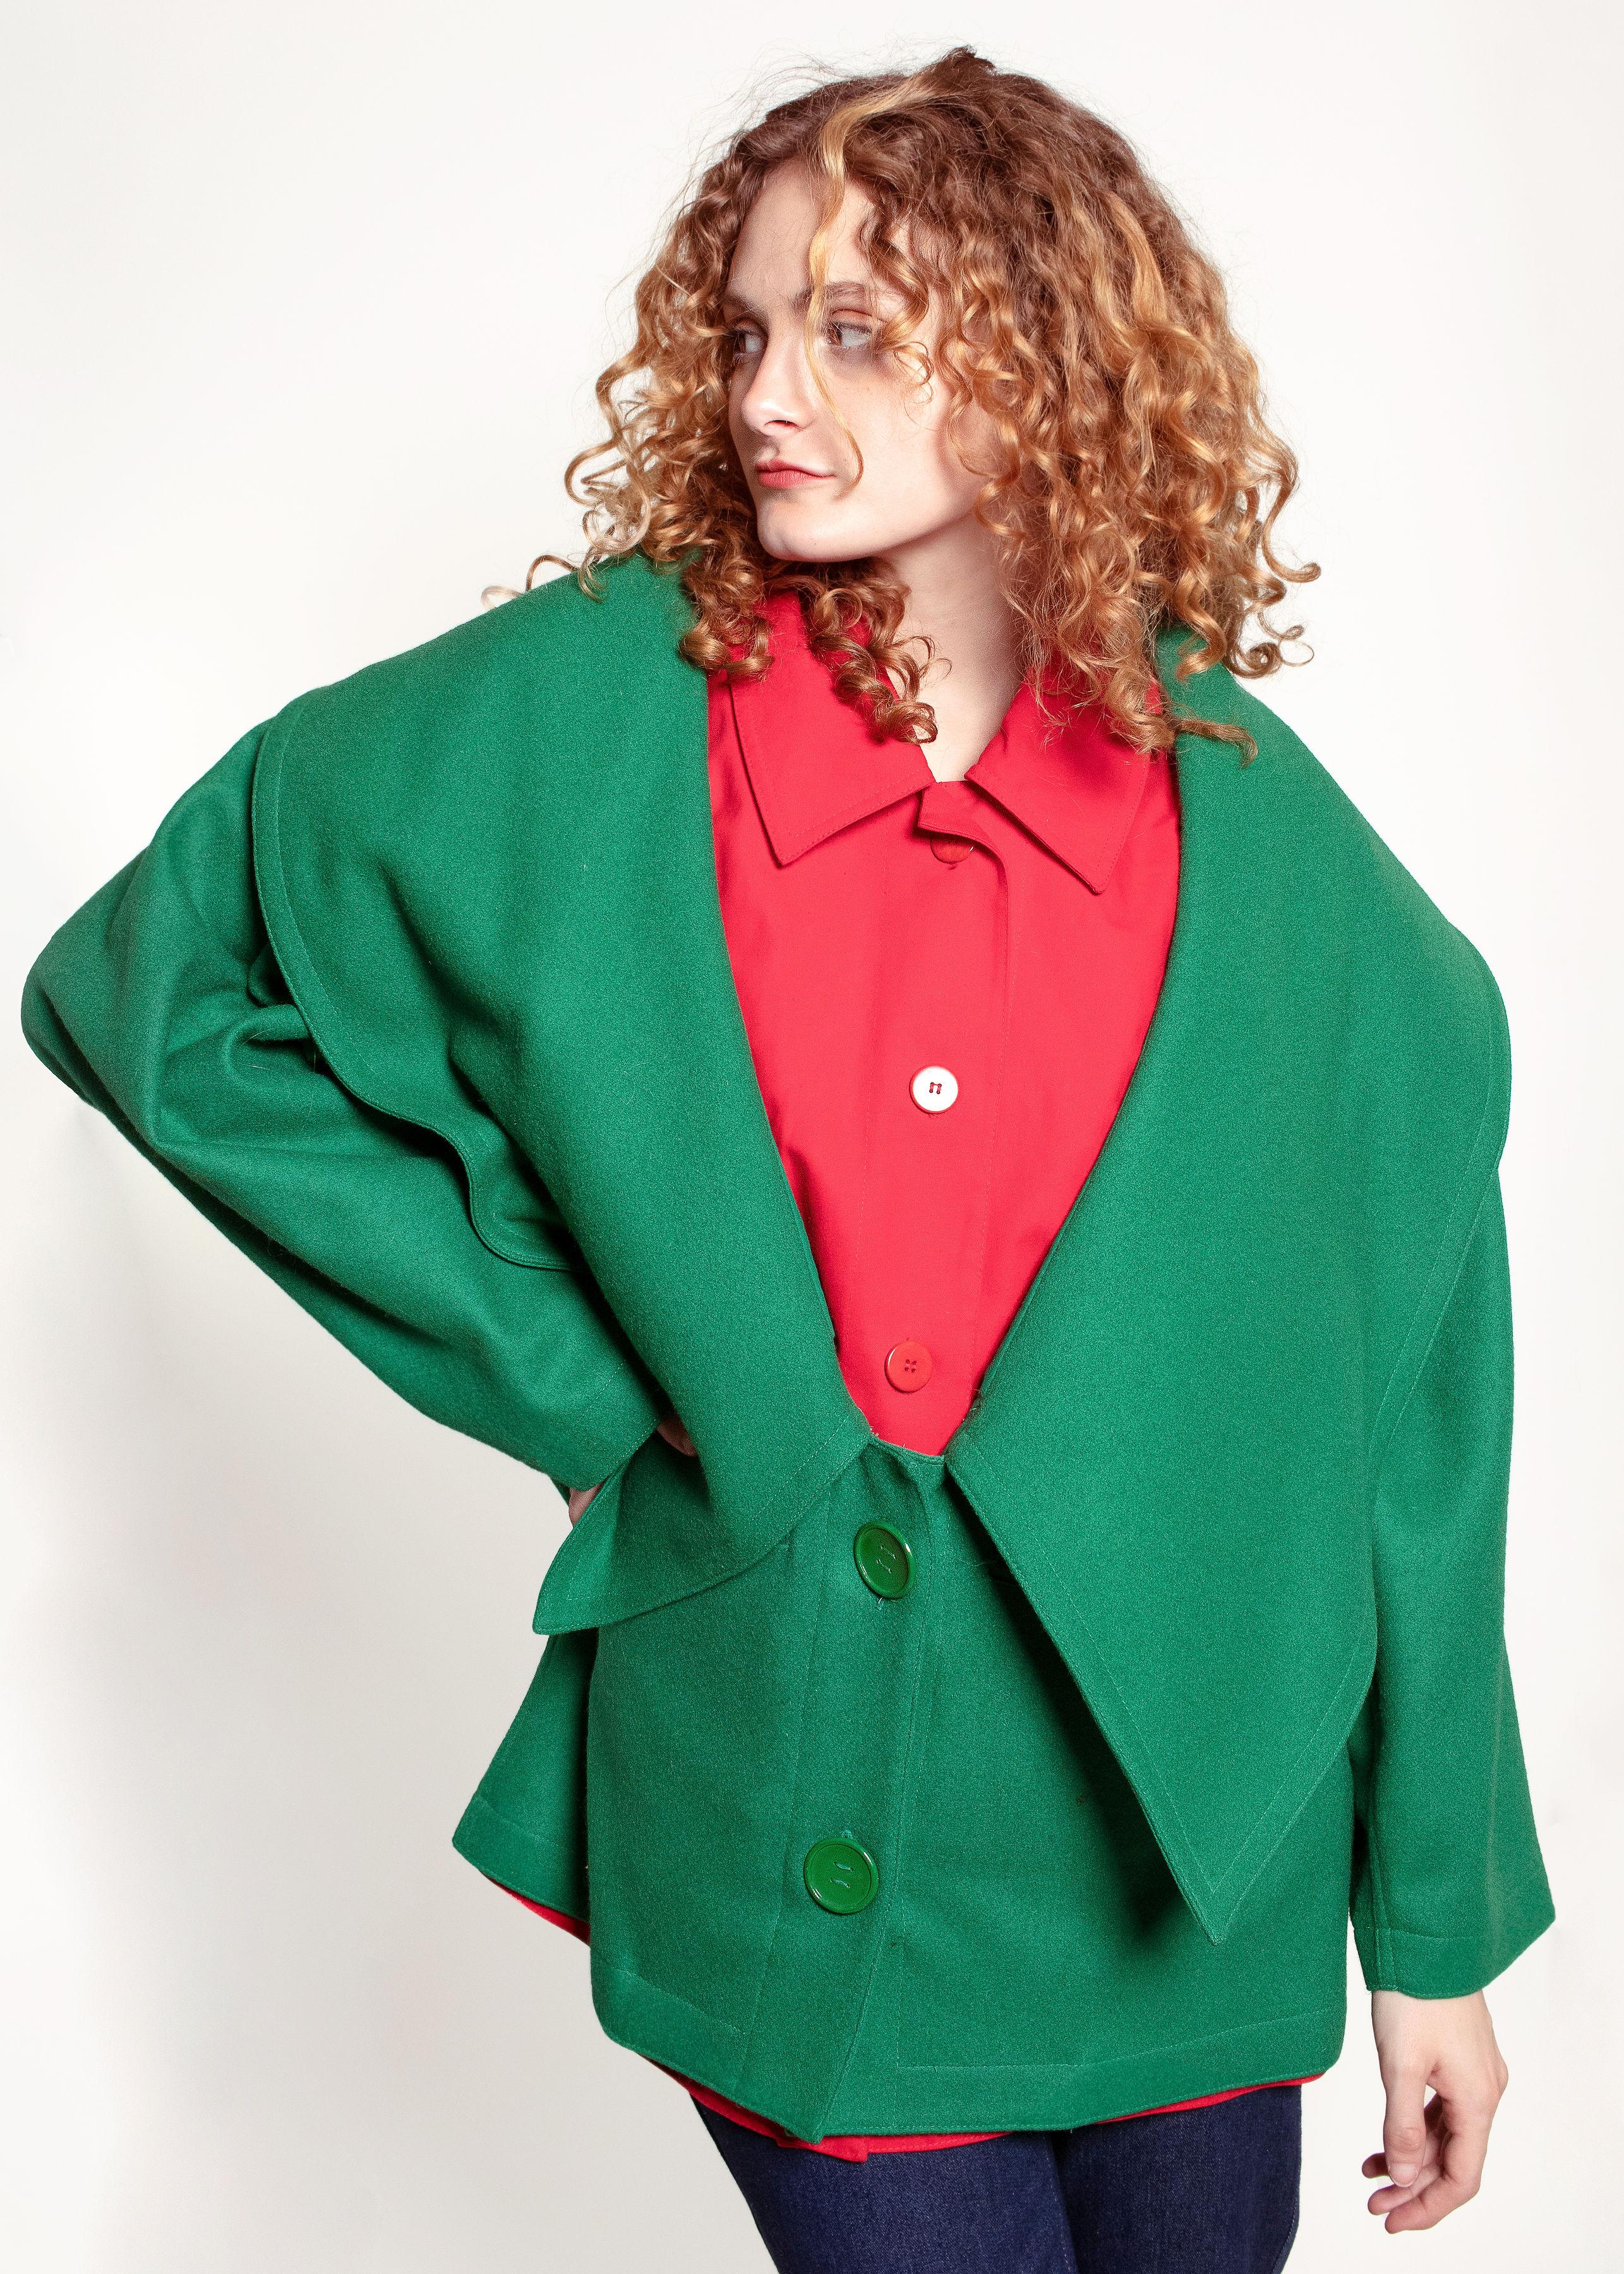 The biggest collar you ever did see! This JC De Castelbajac coat has the look of two layers with the simplicity of one. Designed with two layers and two front pockets, allowing you to stay warm in style. The eye-catching red & green palette is sure